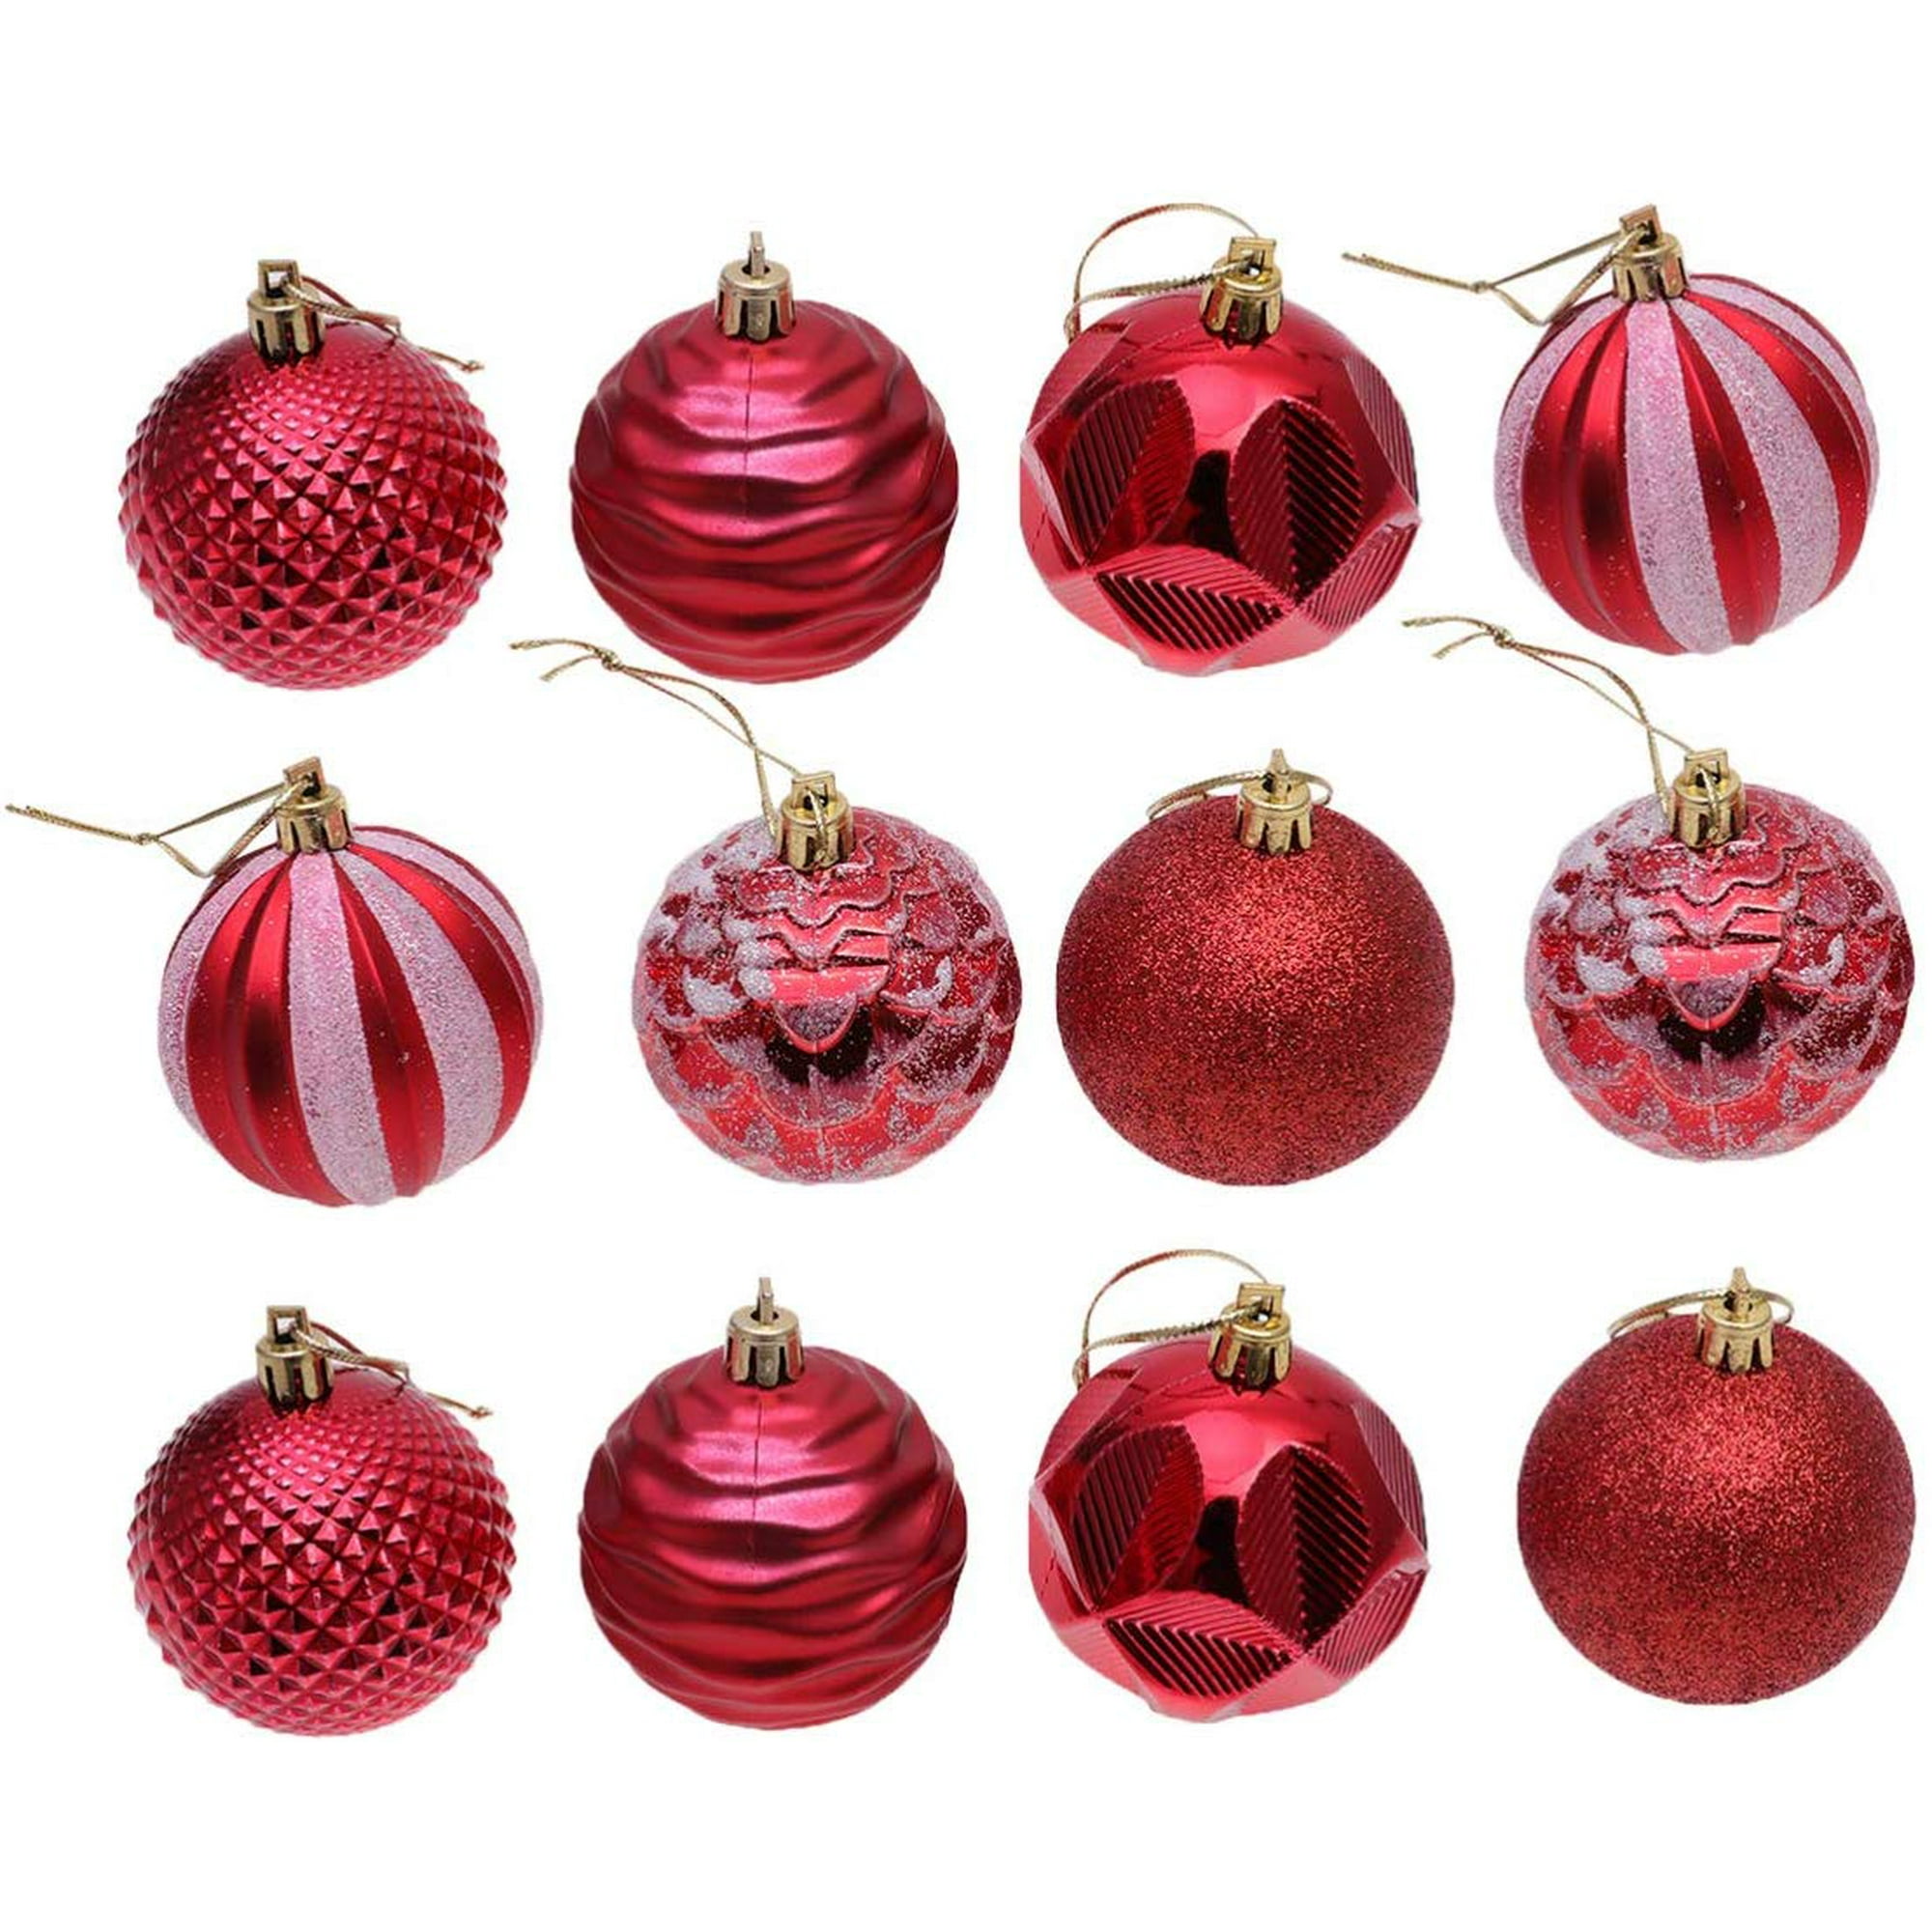 Christmas Ball Ornaments For Xmas Tree Shatterproof Christmas Tree Ornaments Christmas Decorations For Party Holiday Home Decor Rose Red Walmart Canada